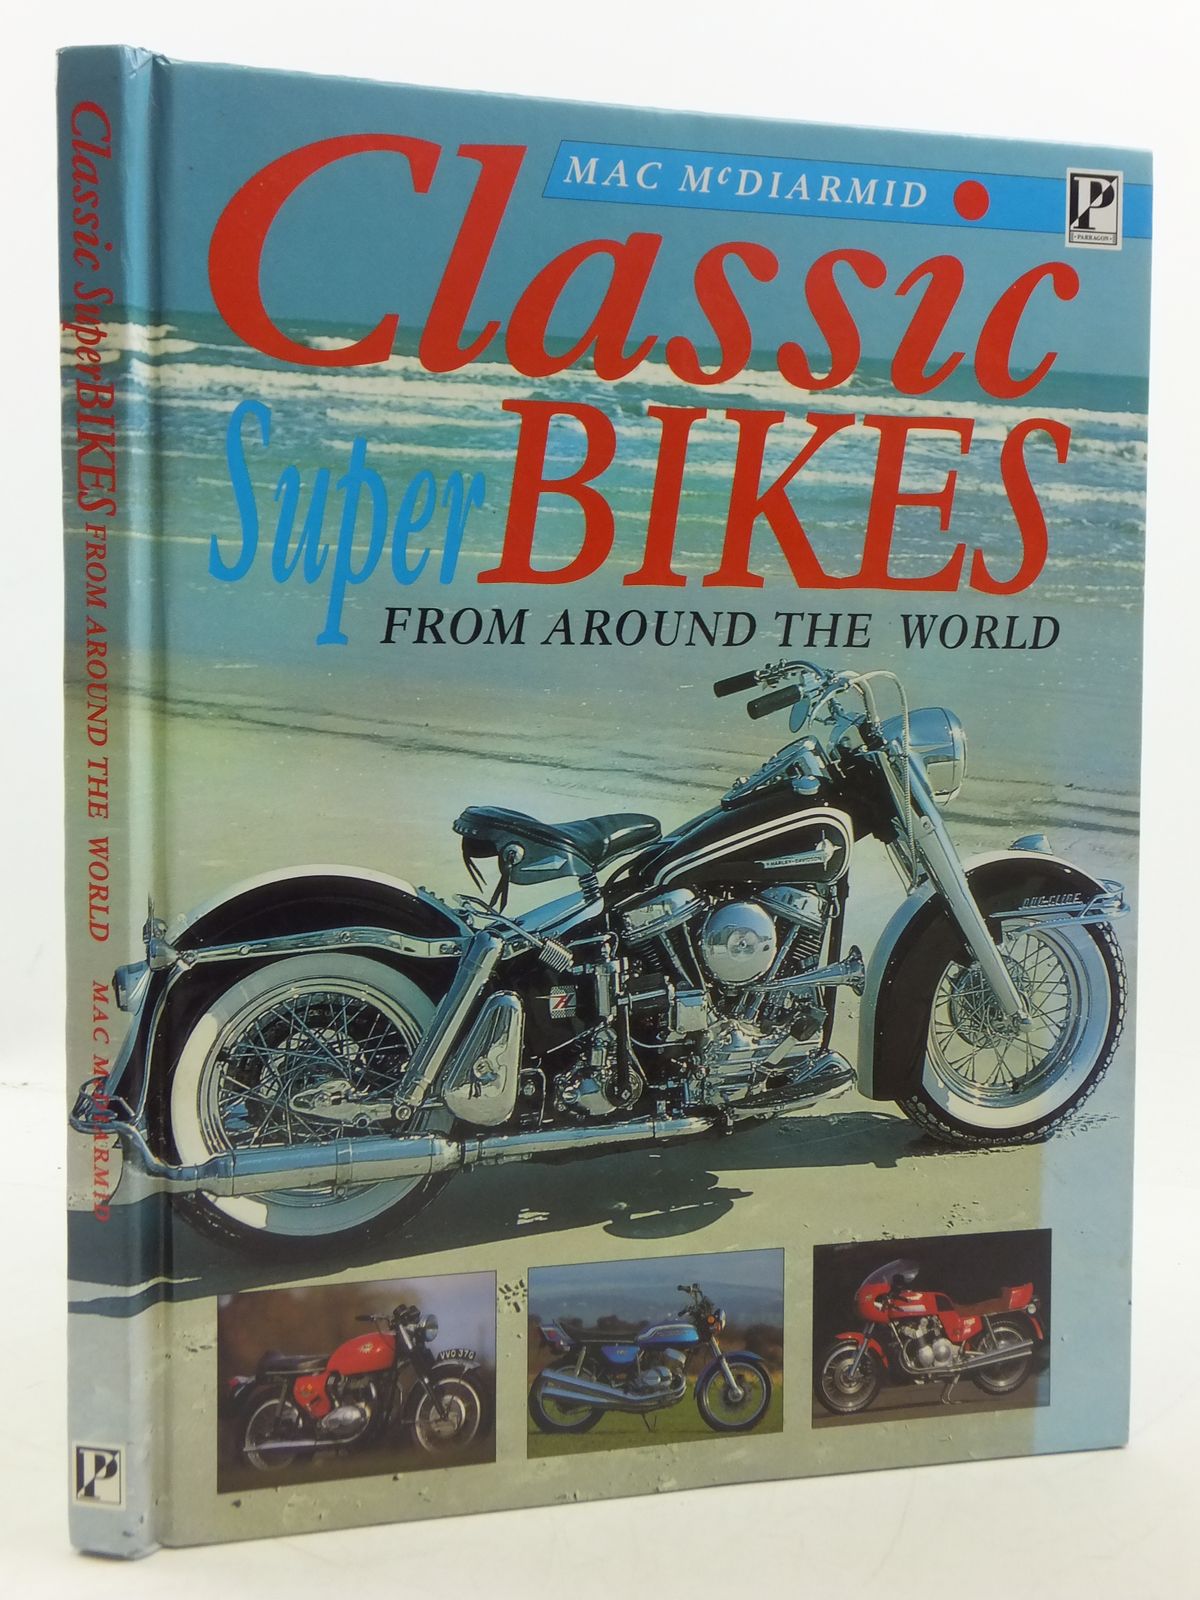 Photo of CLASSIC SUPER BIKES FROM AROUND THE WORLD written by McDiarmid, Mac published by Parragon Books (STOCK CODE: 1605279)  for sale by Stella & Rose's Books